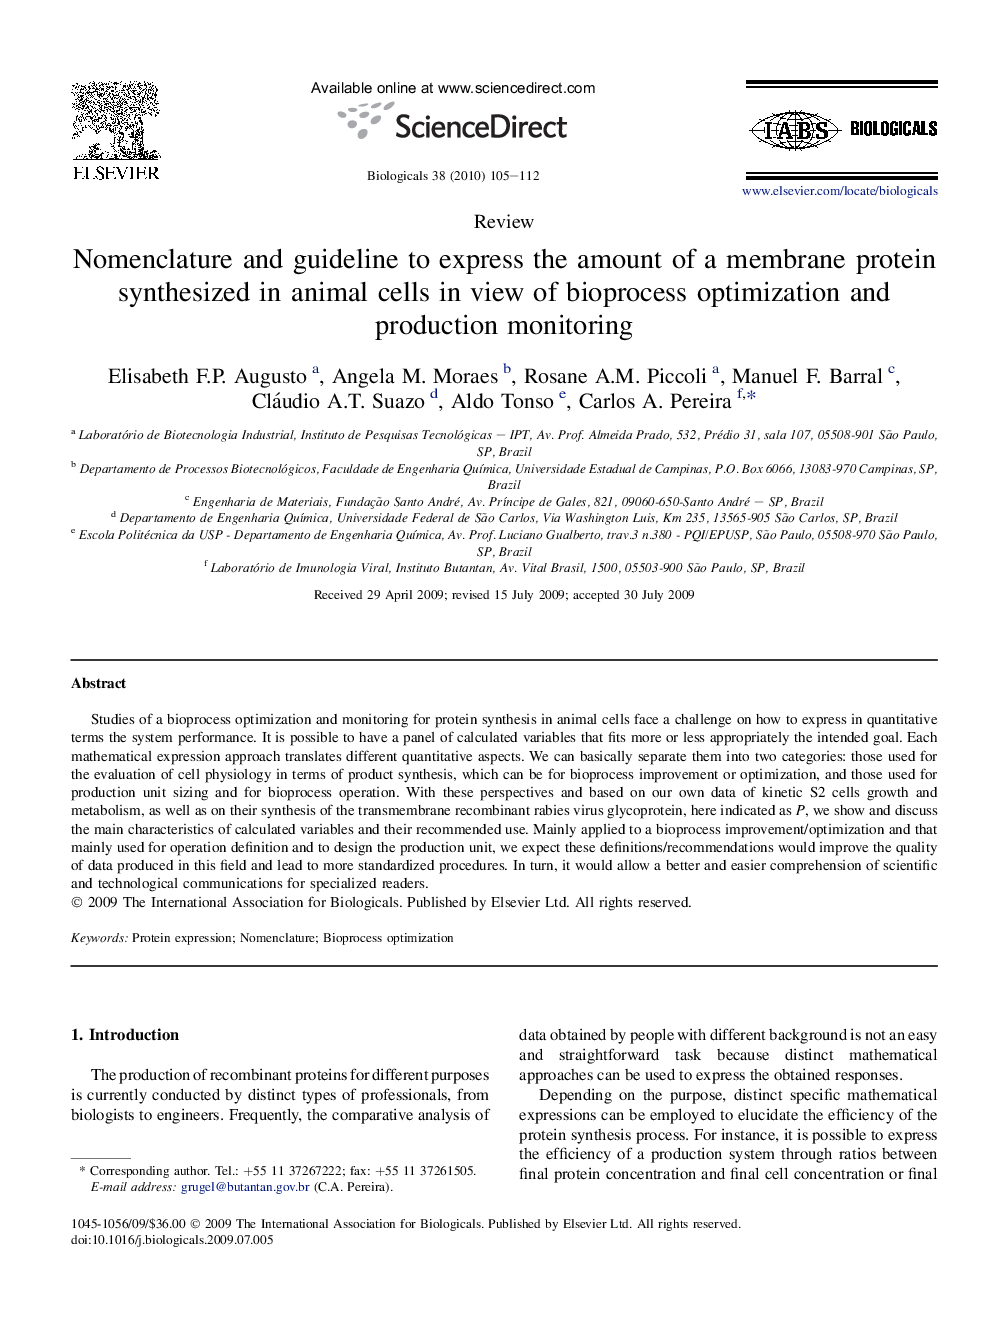 Nomenclature and guideline to express the amount of a membrane protein synthesized in animal cells in view of bioprocess optimization and production monitoring